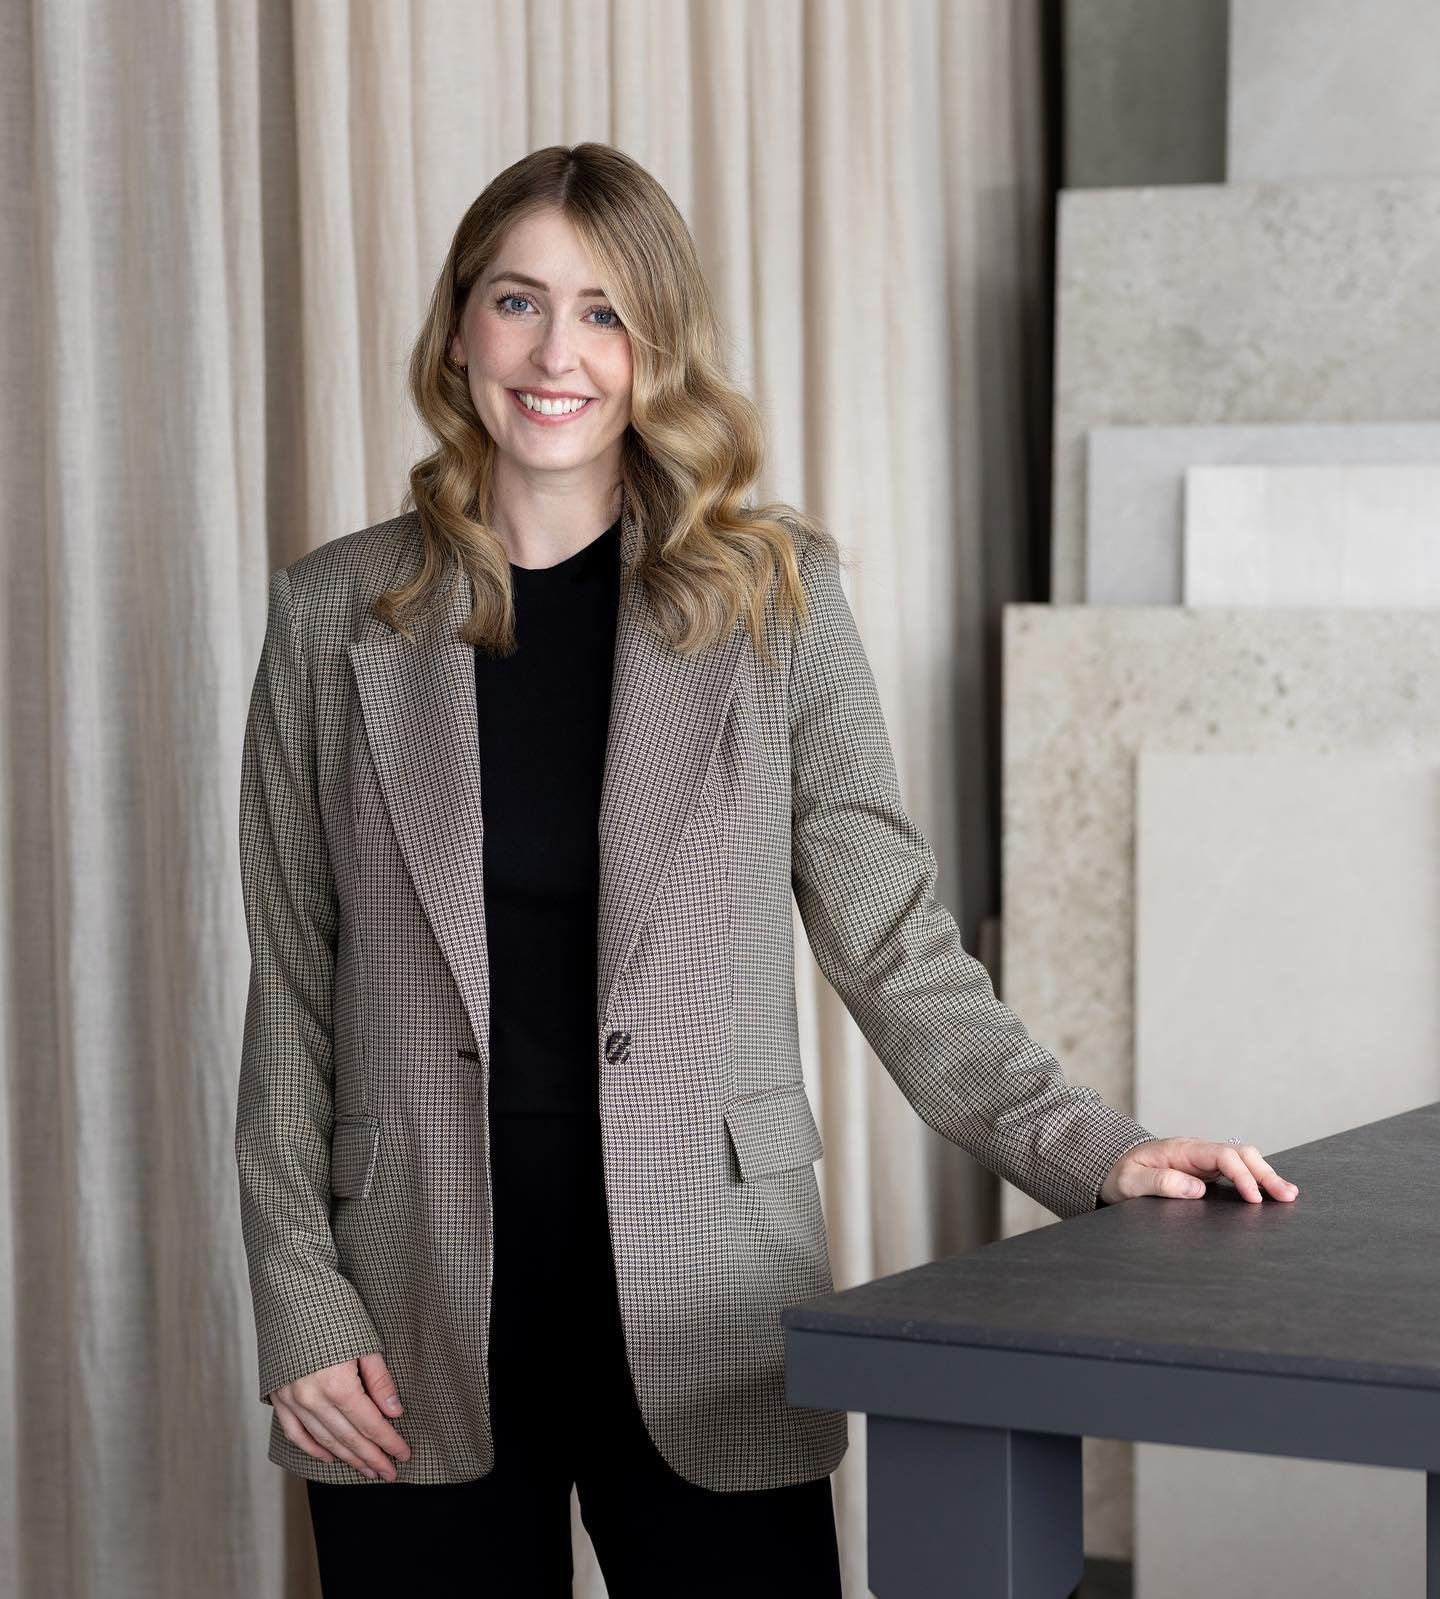 Meet our Auckland Yellowfox Designer, Lucy McBride! 💛

Get to know Lucy, &ldquo;Bringing spaces to life through a blend of aesthetic vision and functional design tailored to a client&rsquo;s home use is my passion. I believe that great design evolve